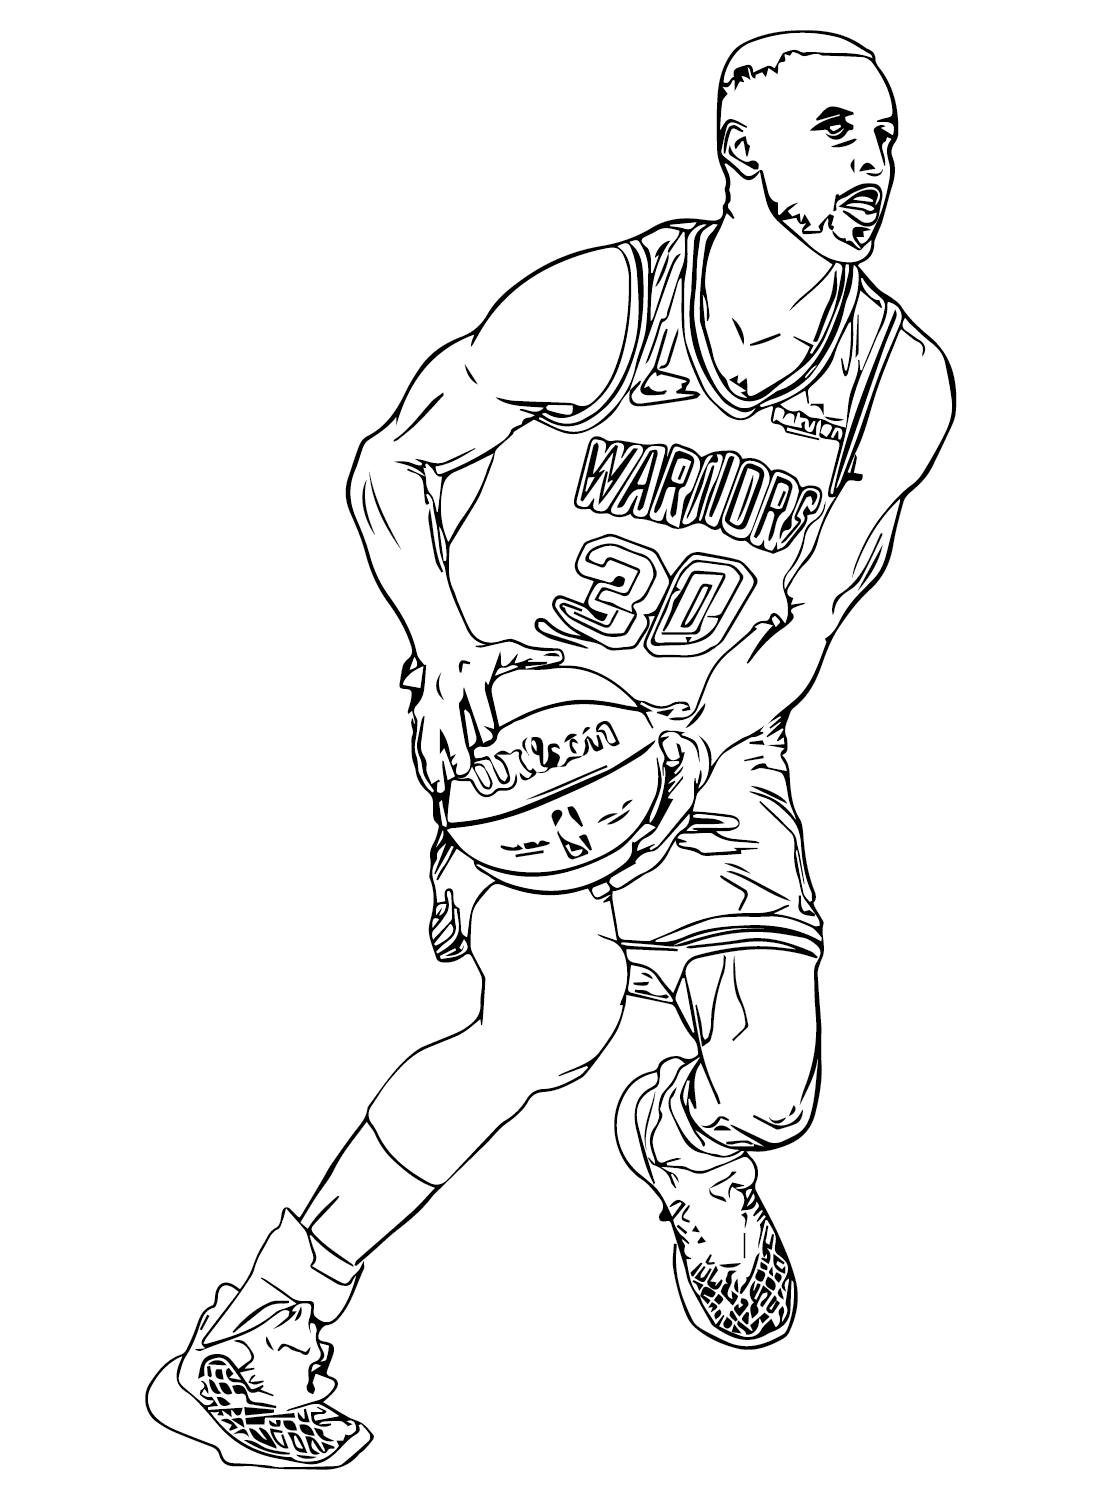 Stephen Curry Coloring Pages - Free Printable Coloring Pages